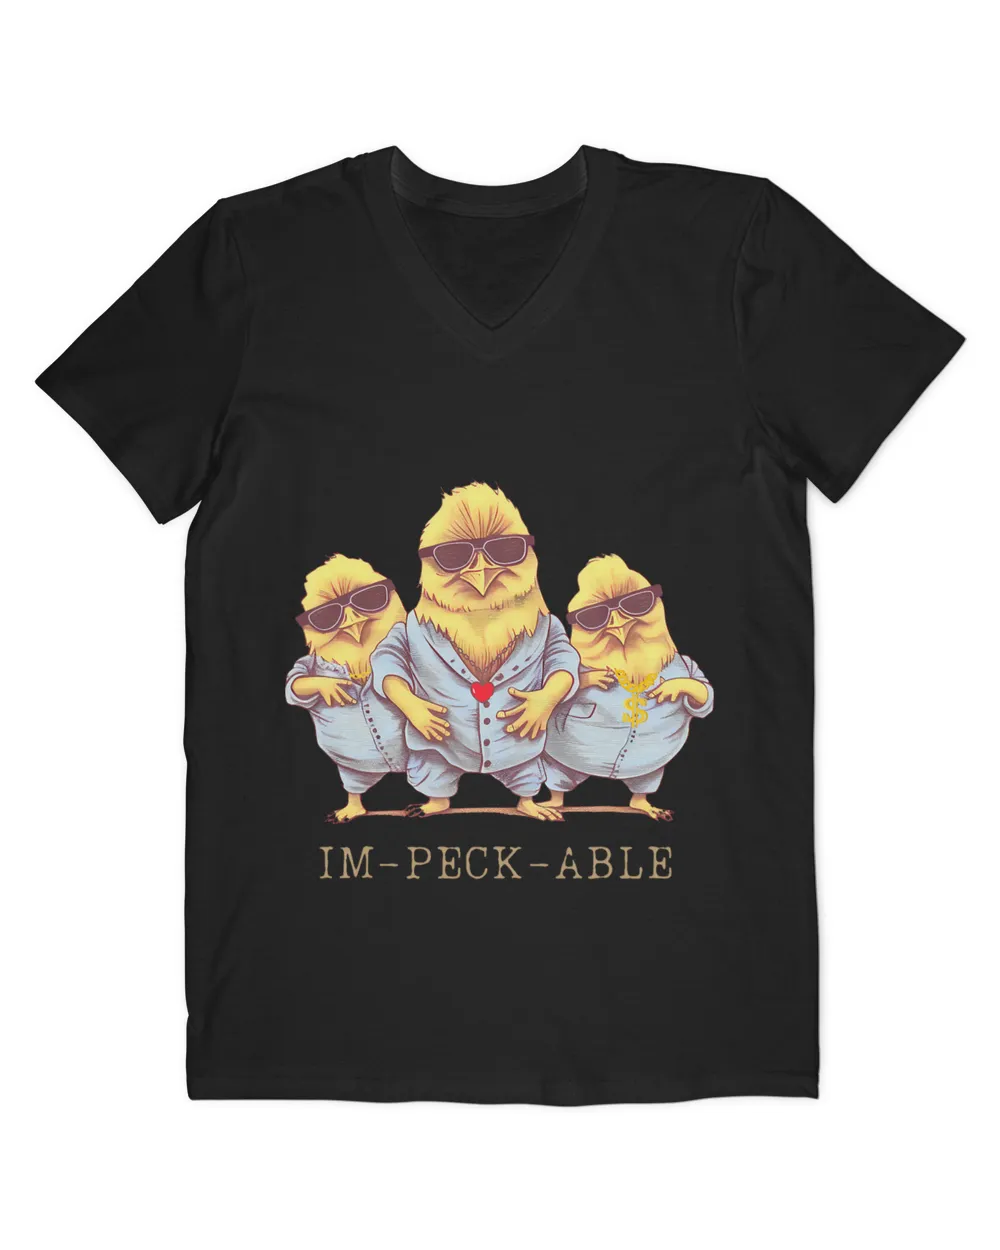 chicken fashion is funny im peck able kids